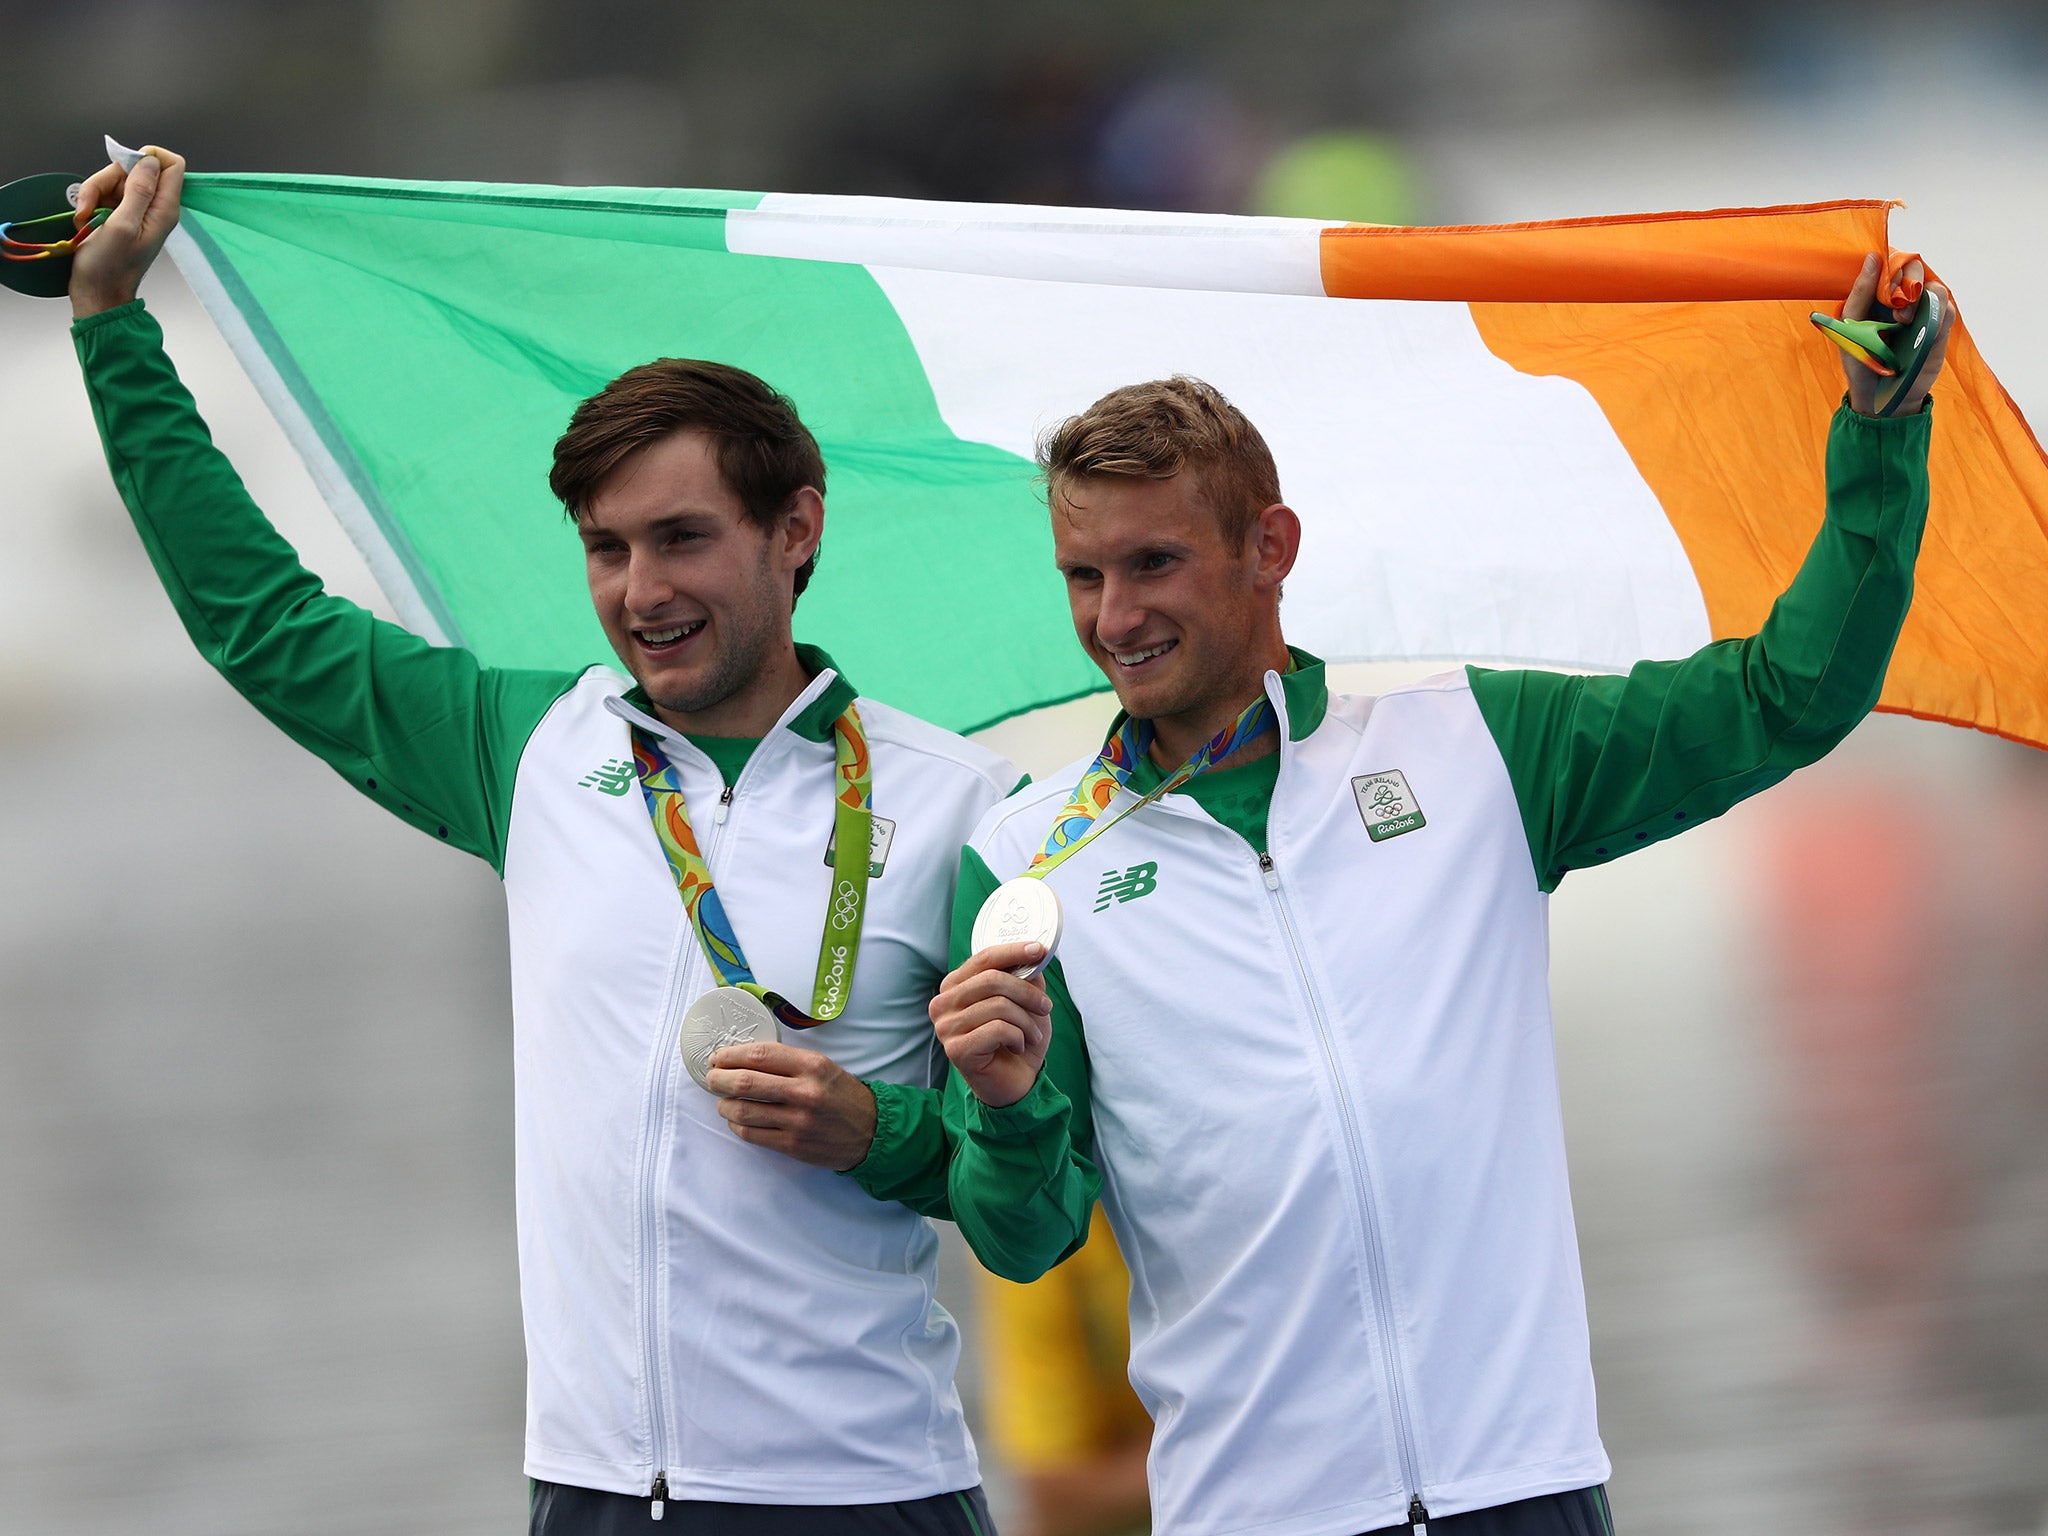 The O'Donovan brothers secured Ireland's first medal of the Rio Olympics